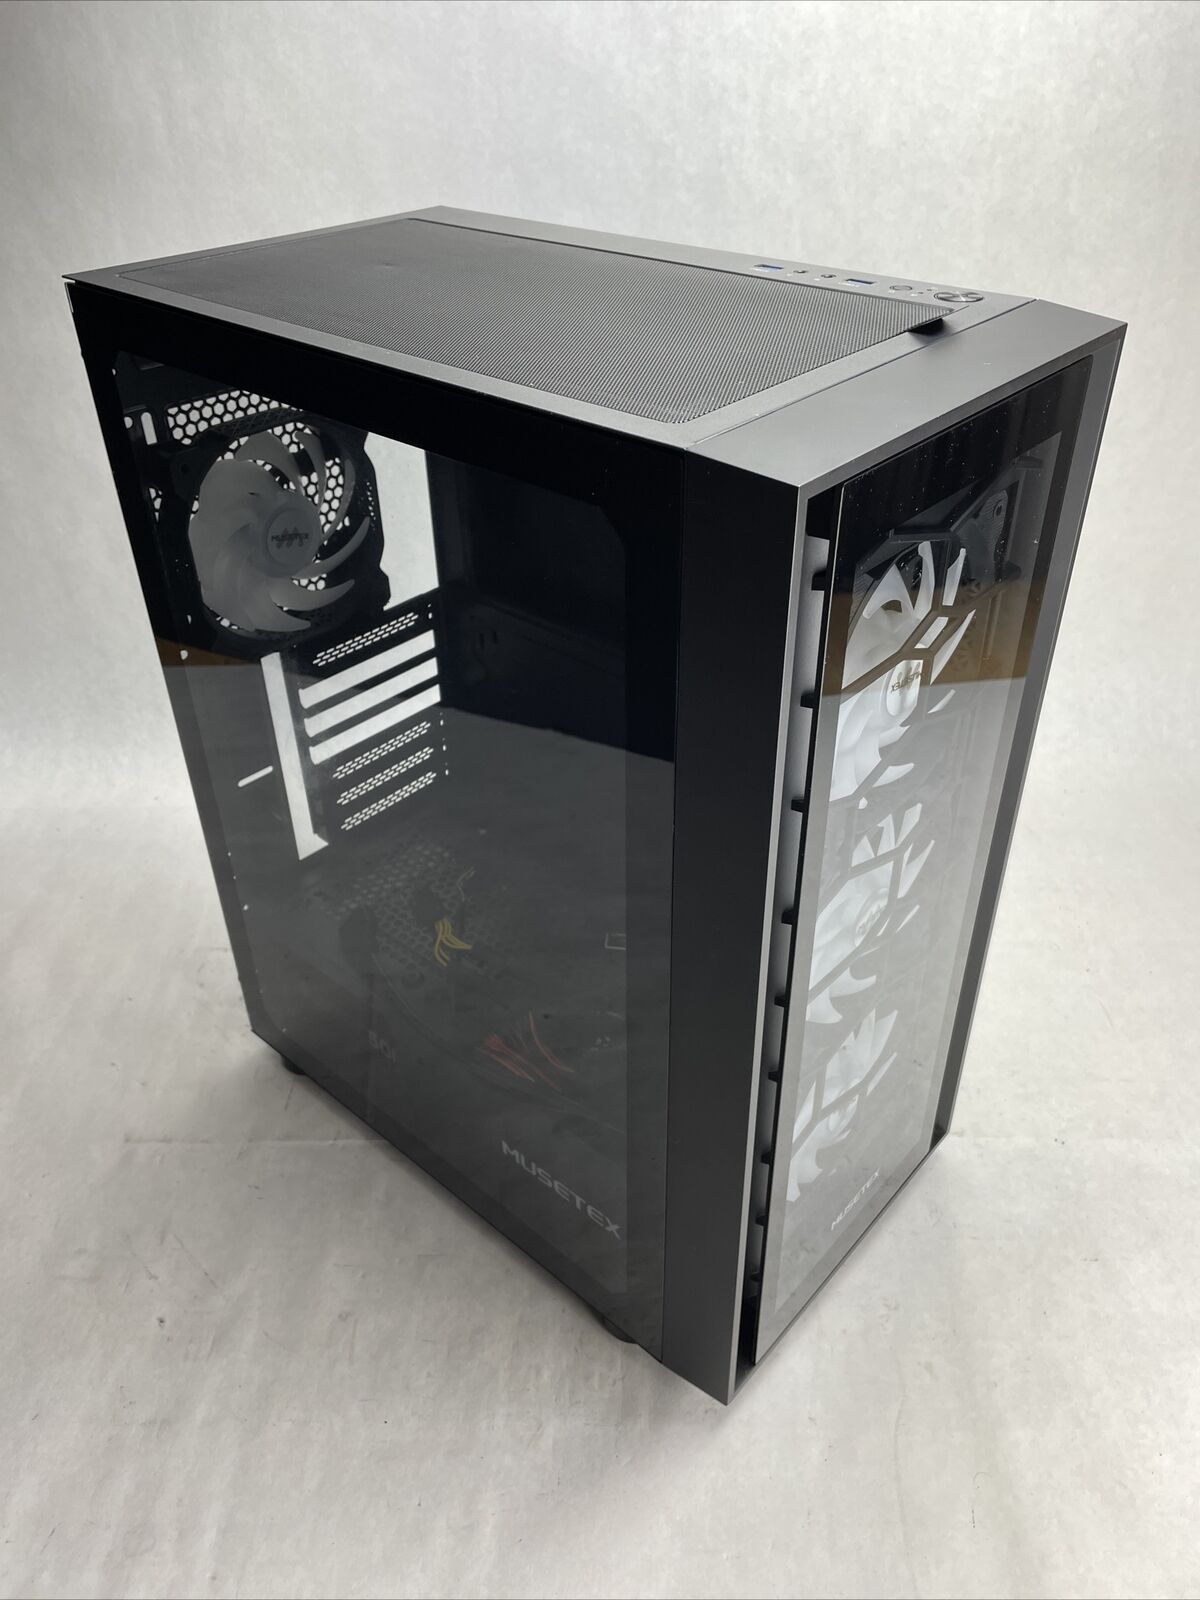 Mustex Mid Tower Computer Case w/Thermaltake Smart 500W Power Supply